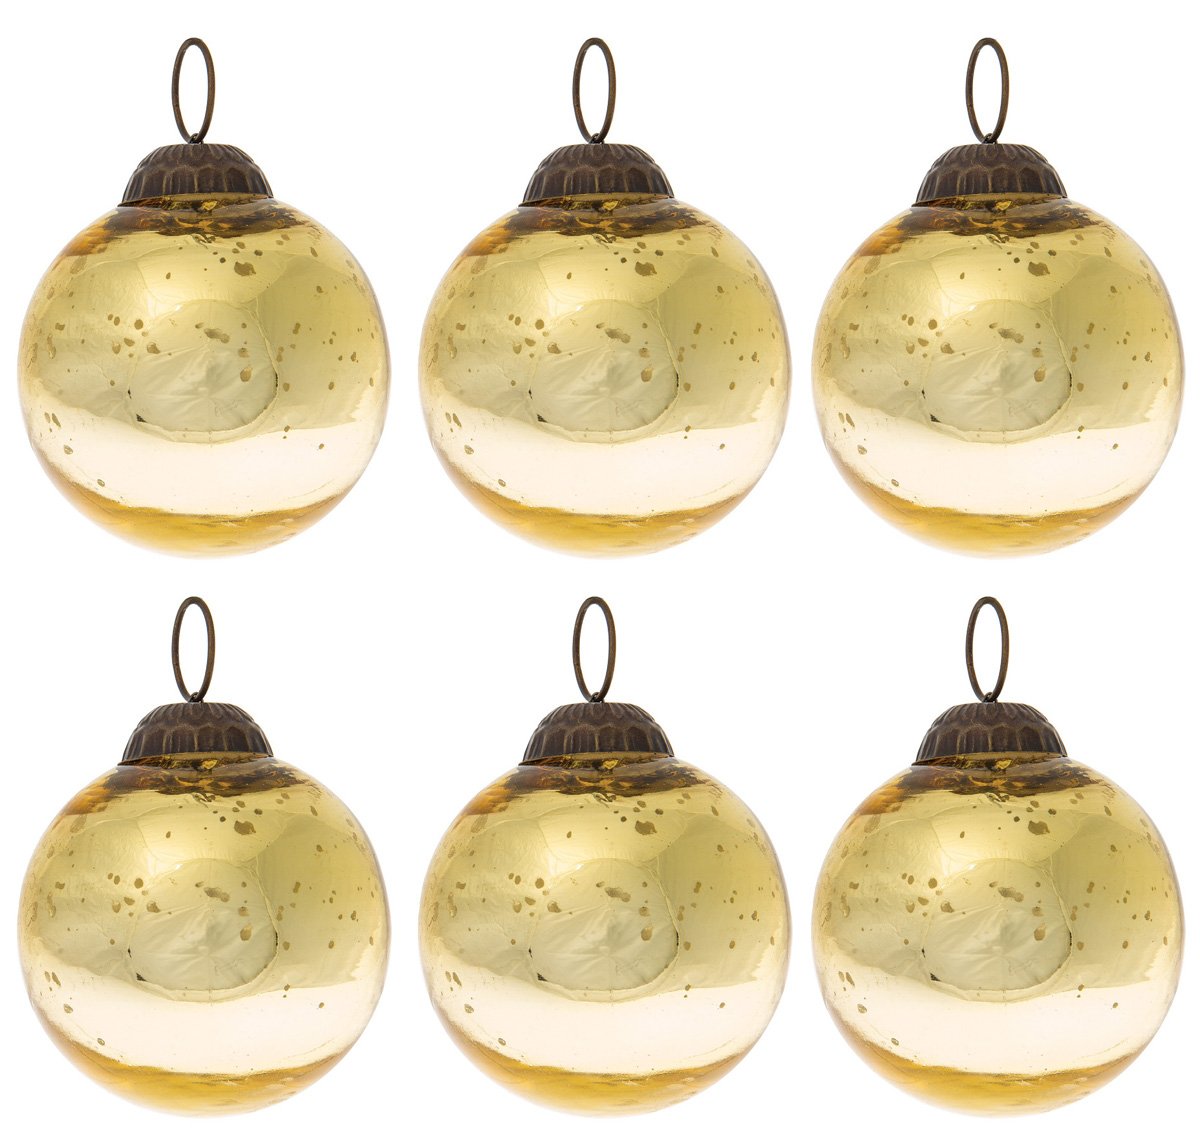 6 Pack | Small Mercury Glass Ball Ornaments (2.5-inch, Gold, Ava) - Great Gift Idea, Vintage-Style Decorations for Christmas & Special Occasions